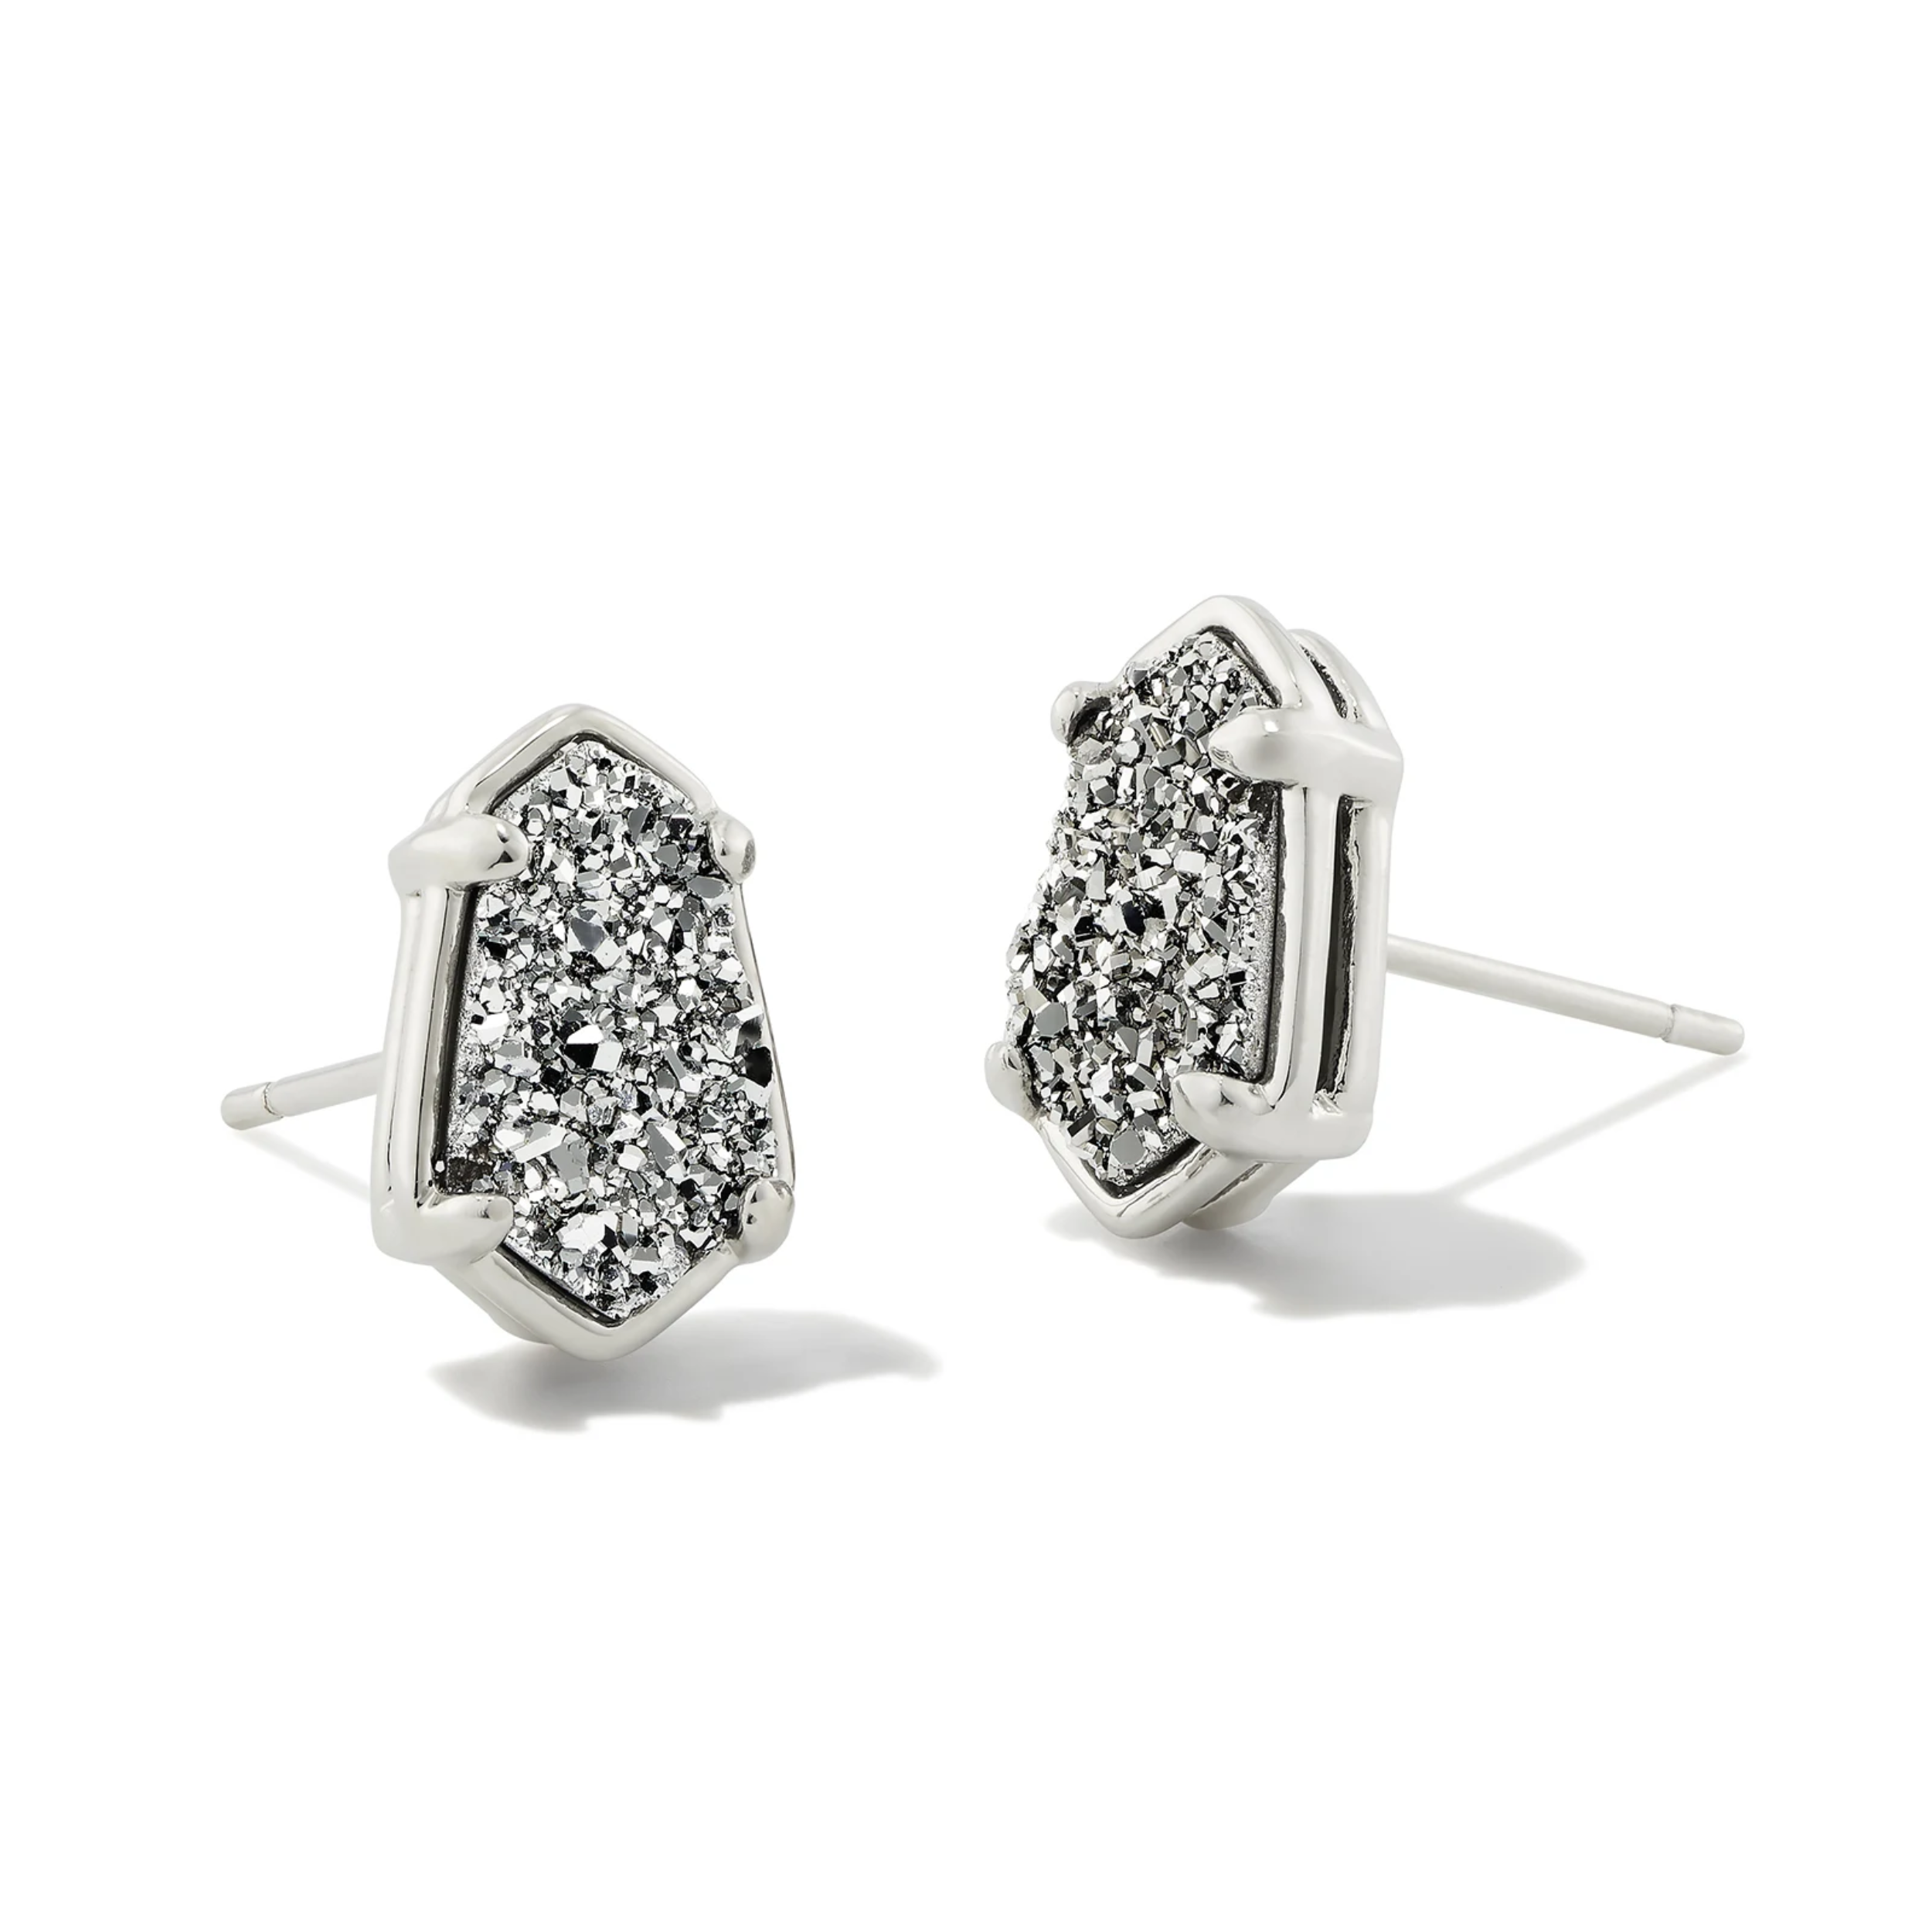 These Alexandria Silver Stud Earrings in Platinum Drusy by Kendra Scott are pictured on a white background.